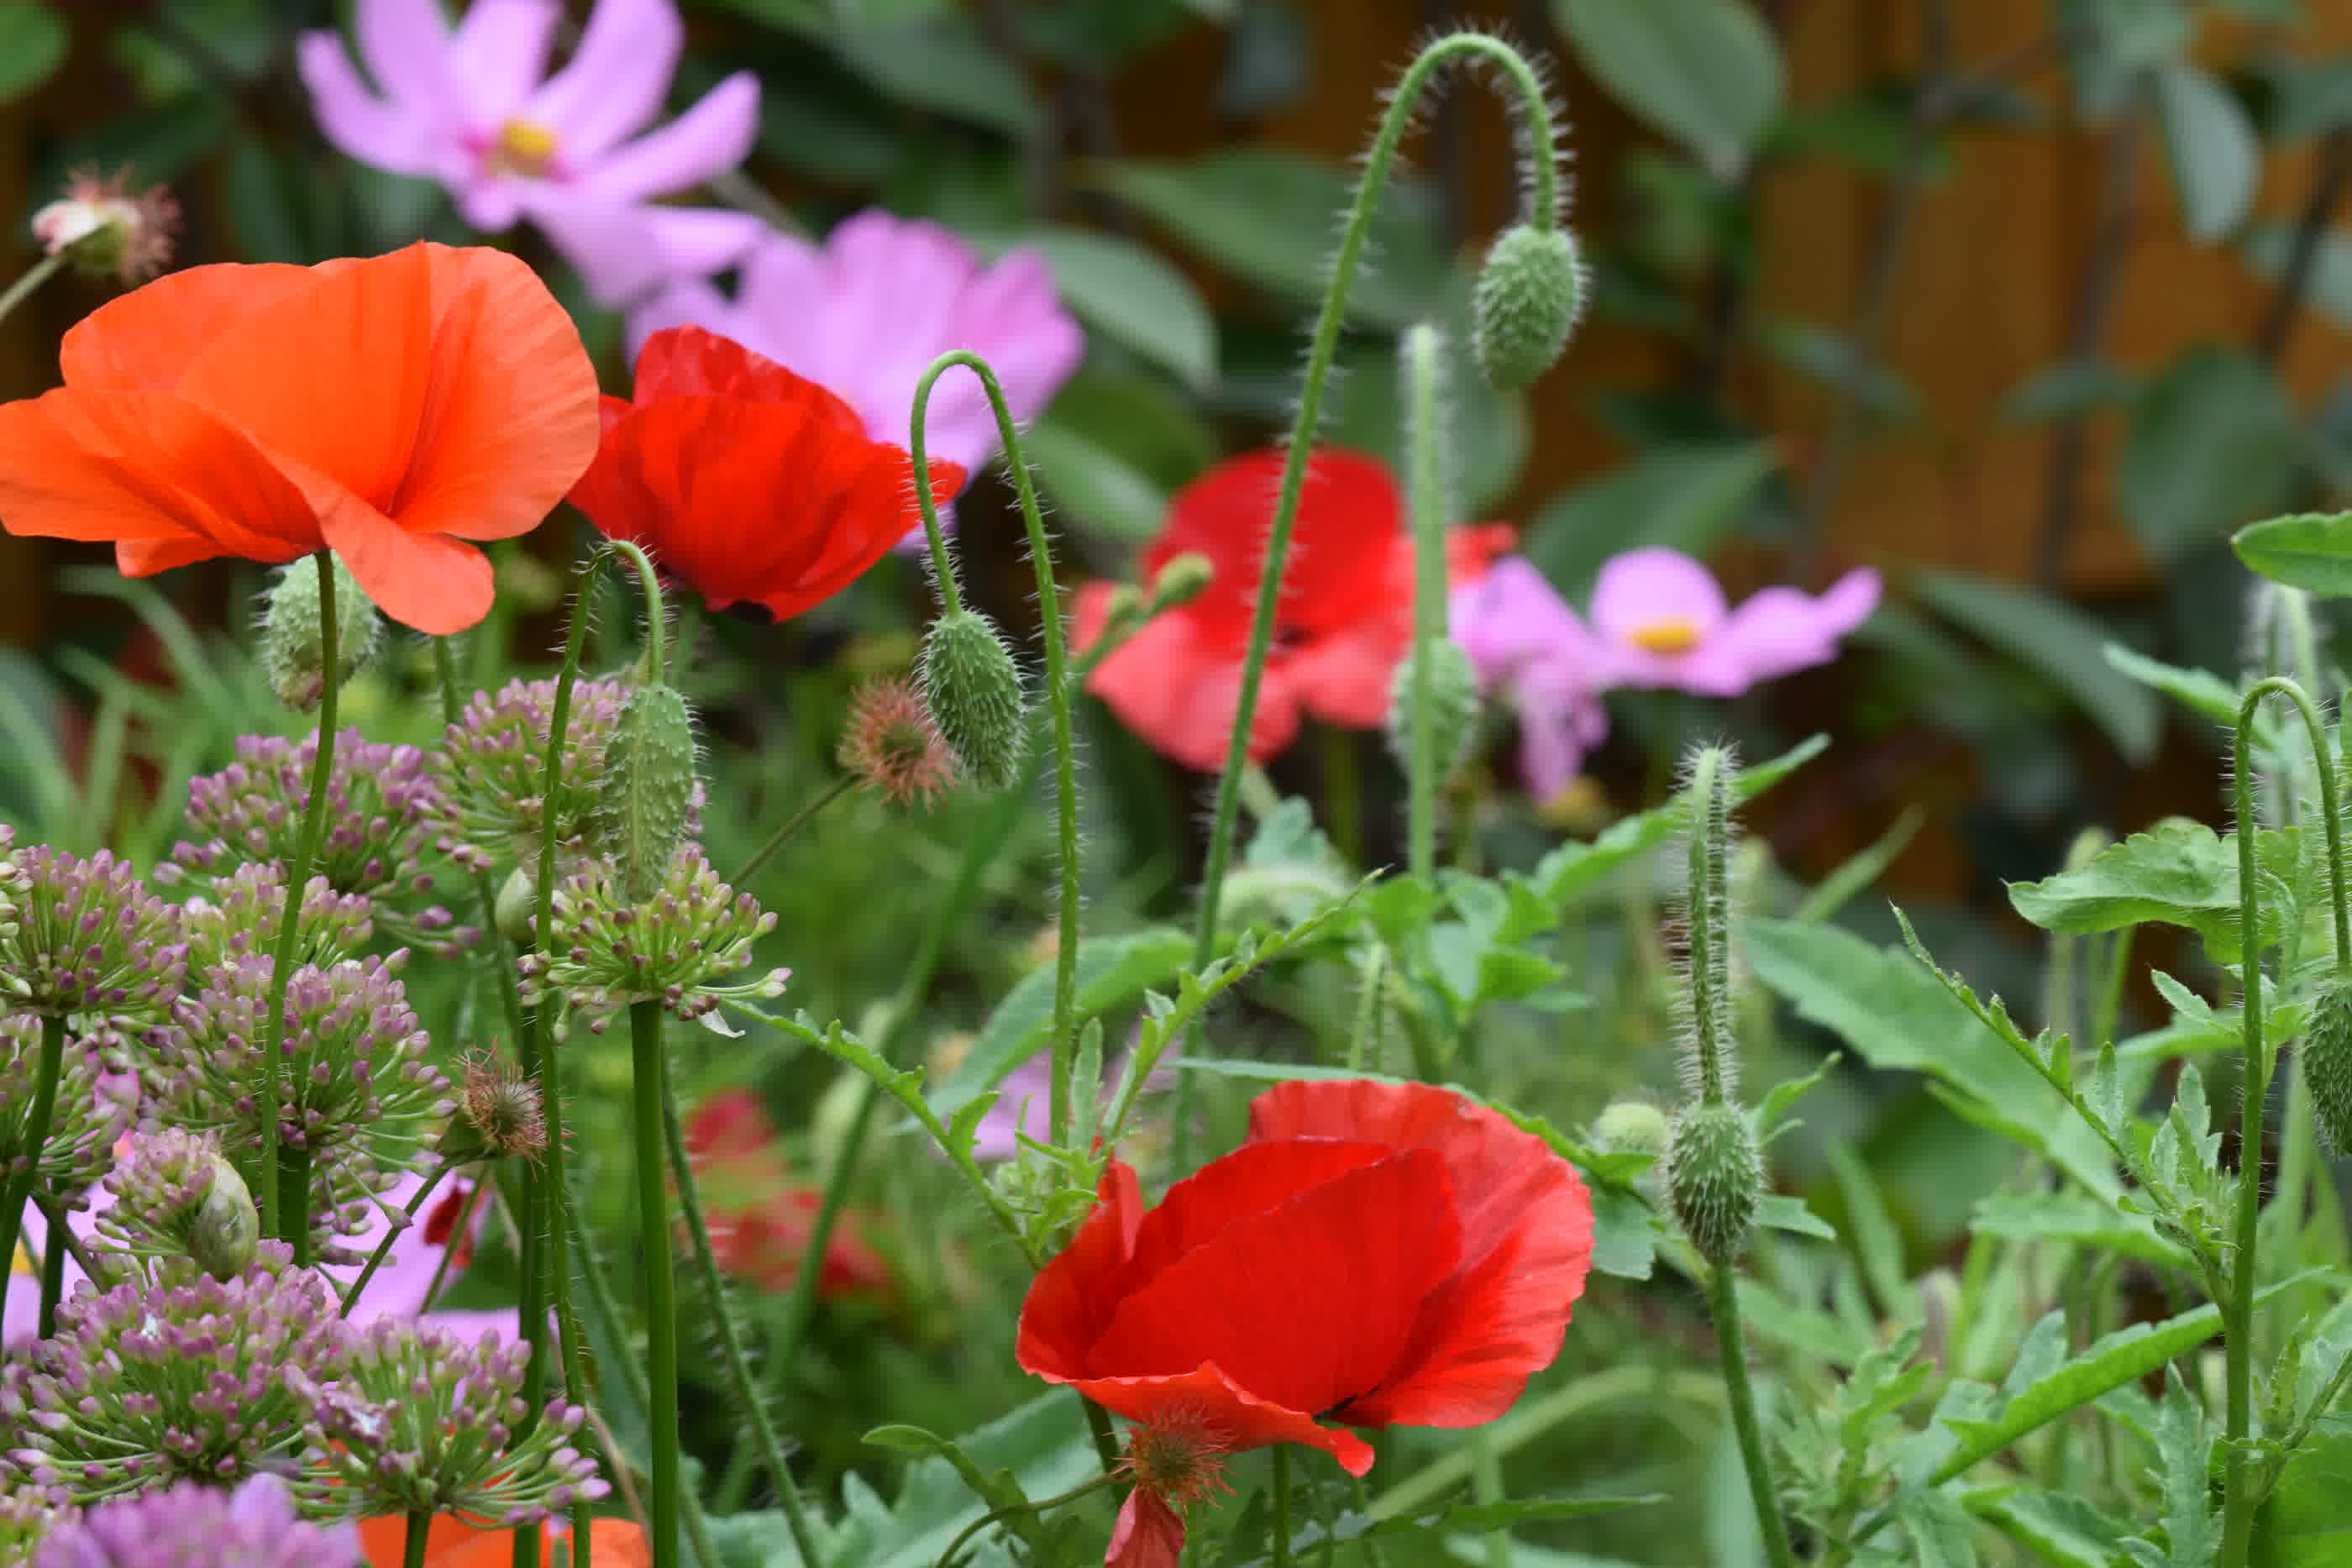 Poppies, alliums, and cosmos in our flower bed